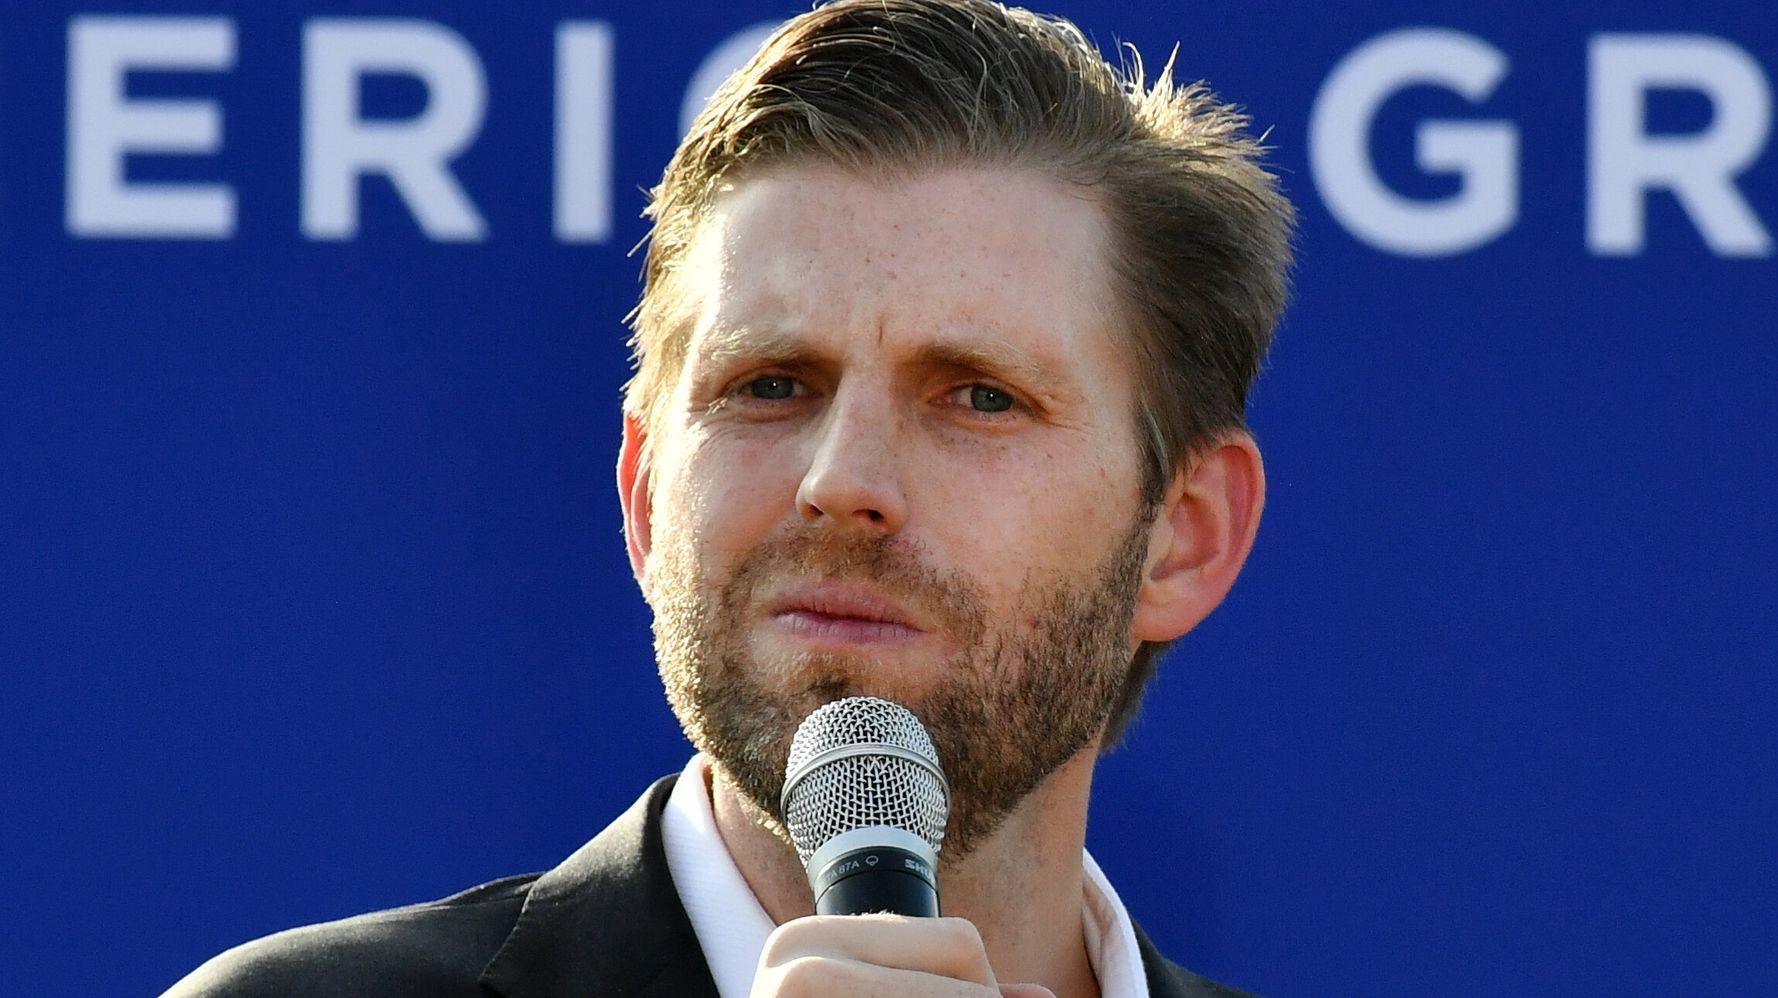 New Book Details How Eric Trump ‘Flipped Out' On Election Night